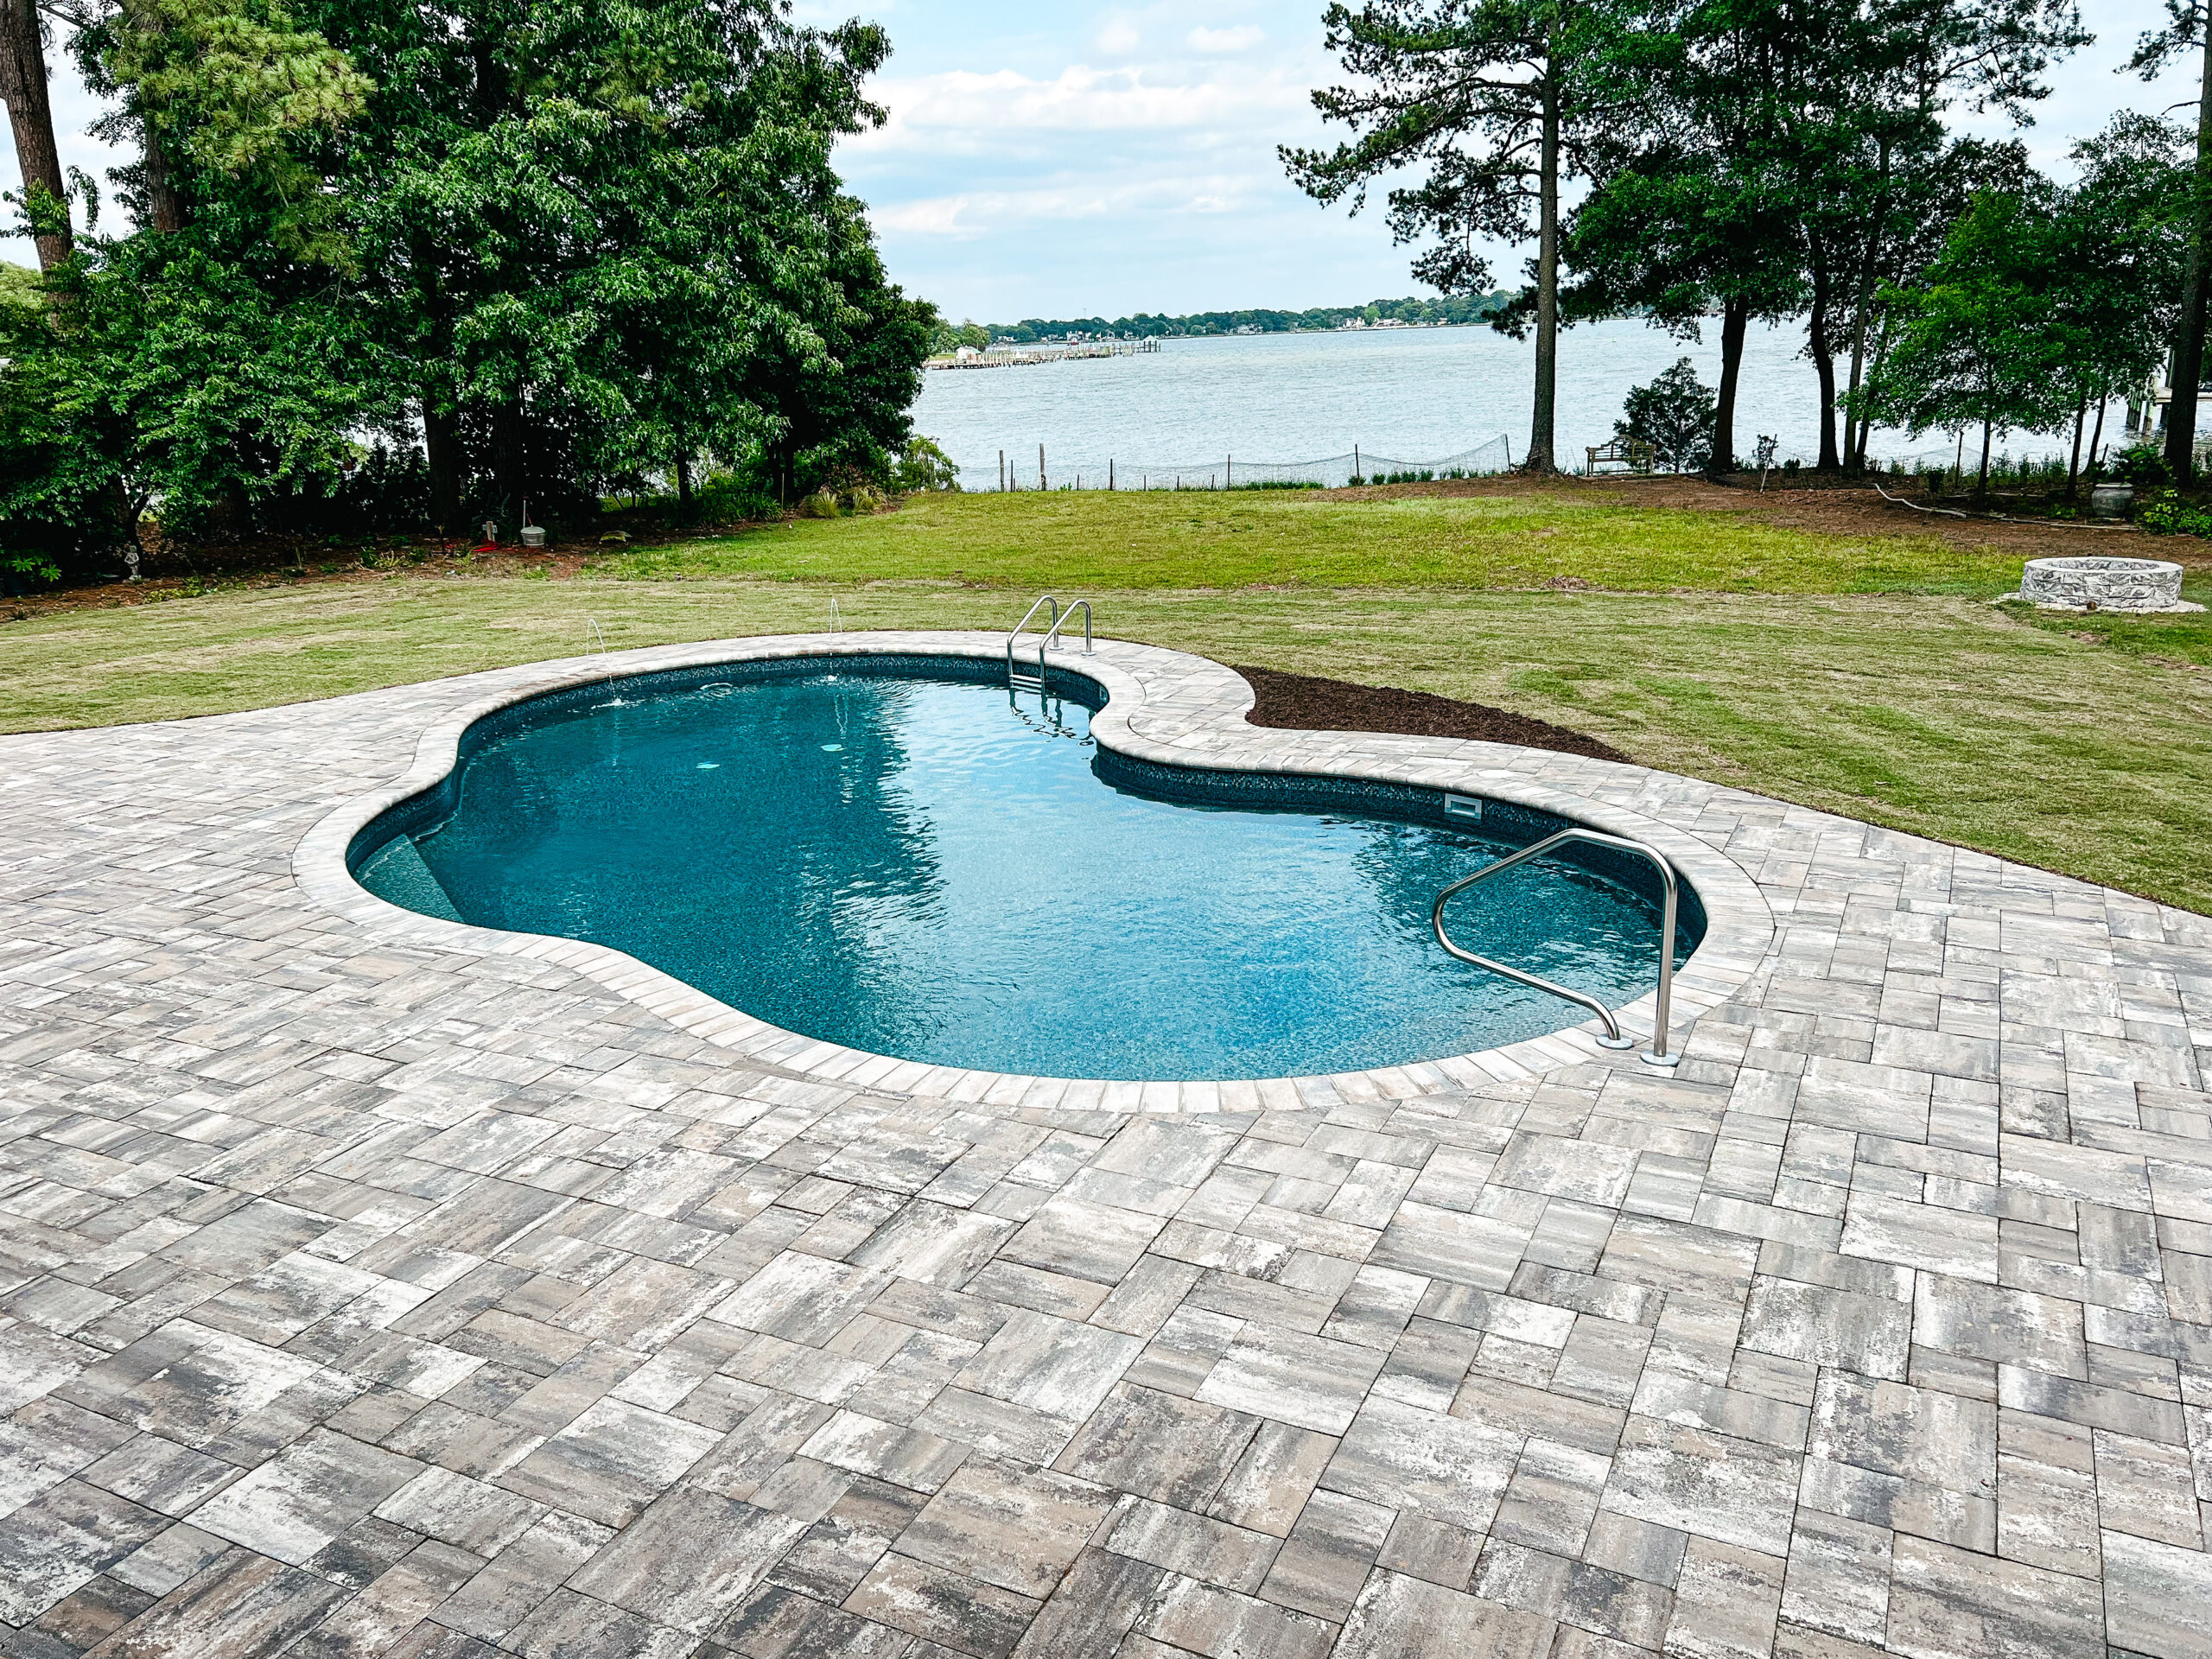 in-ground pool along waterway